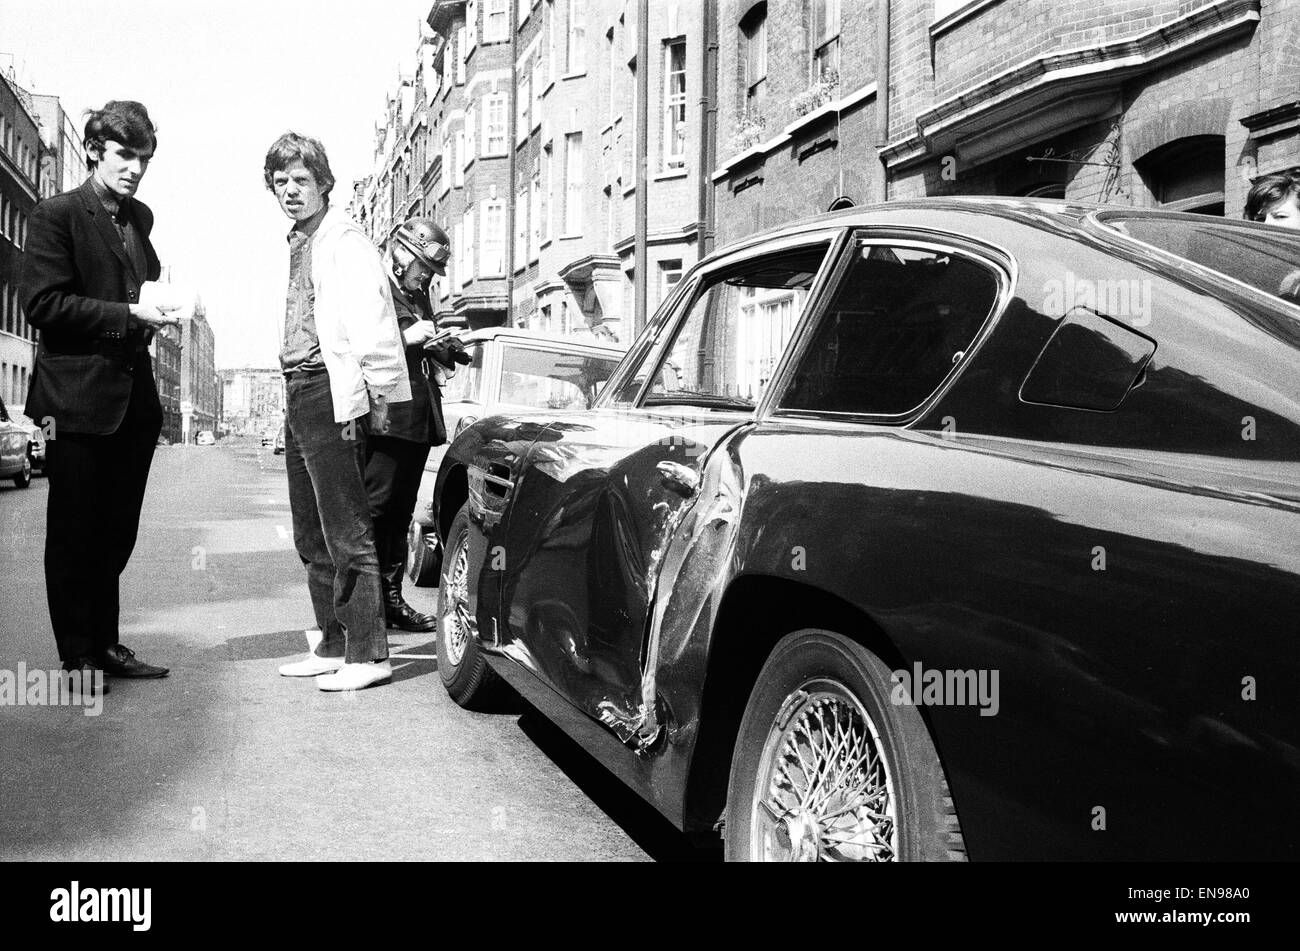 Rolling Stones: 28th August 1966 Mick Jagger's midnight blue Aston Martin  DB6 was involved in collision with a Kraft Foods vehicle in Great  Titchfield Street, London. Jagger's Girlfriend Chrissie Shrimpton looks on